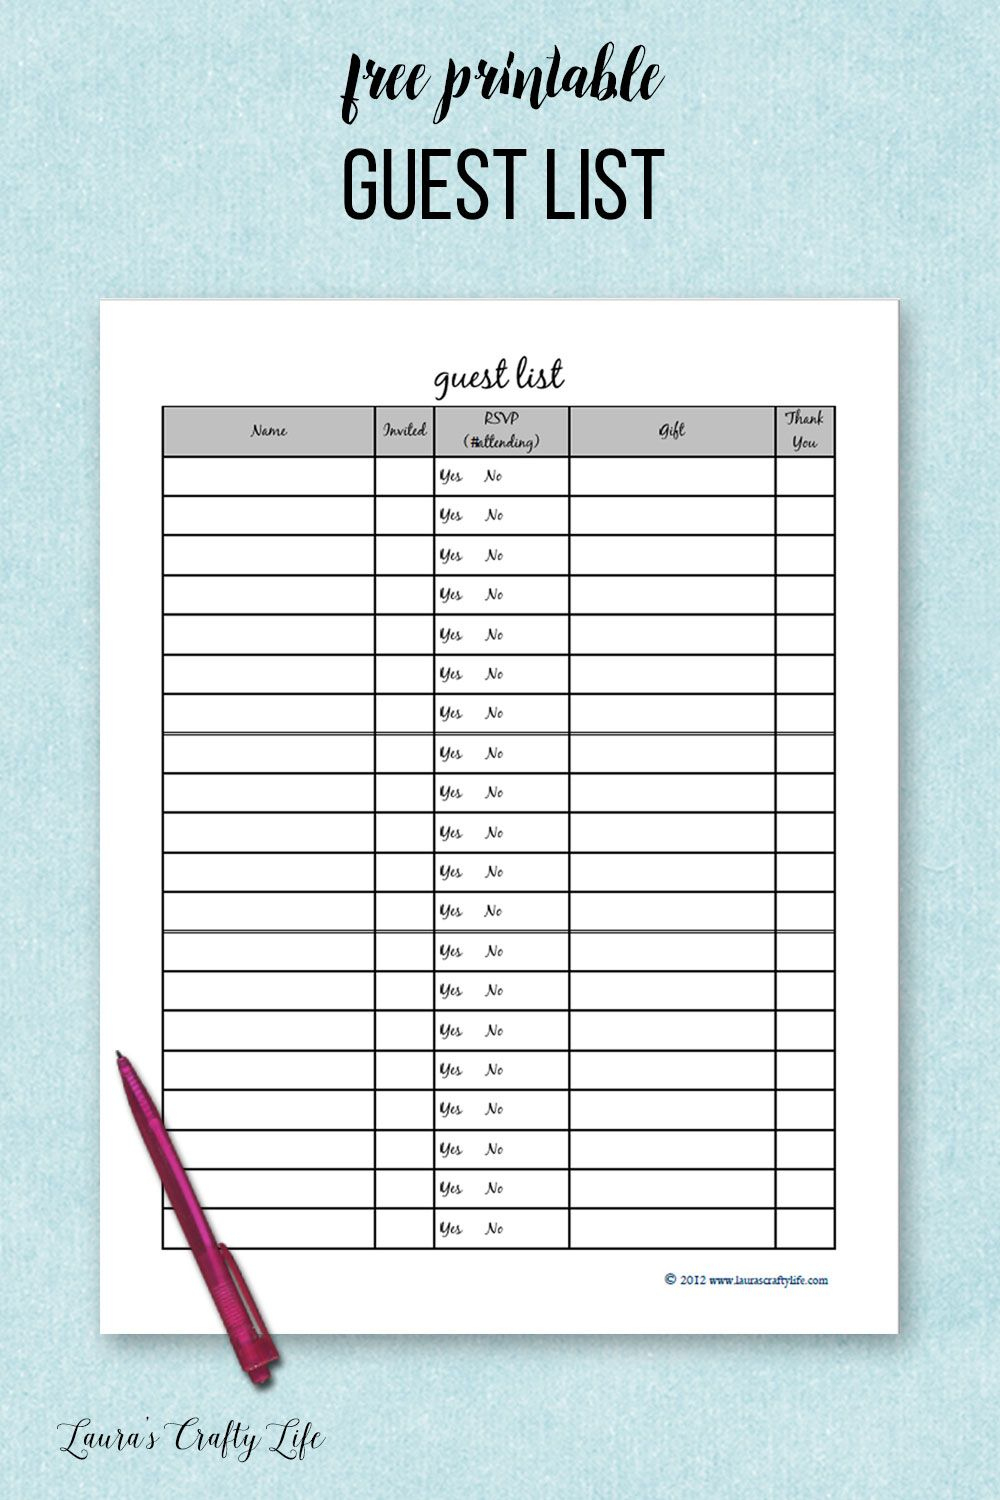 Party Planner Printable - Free Printable Guest List Tracker in Free Printable Birthday Guest List